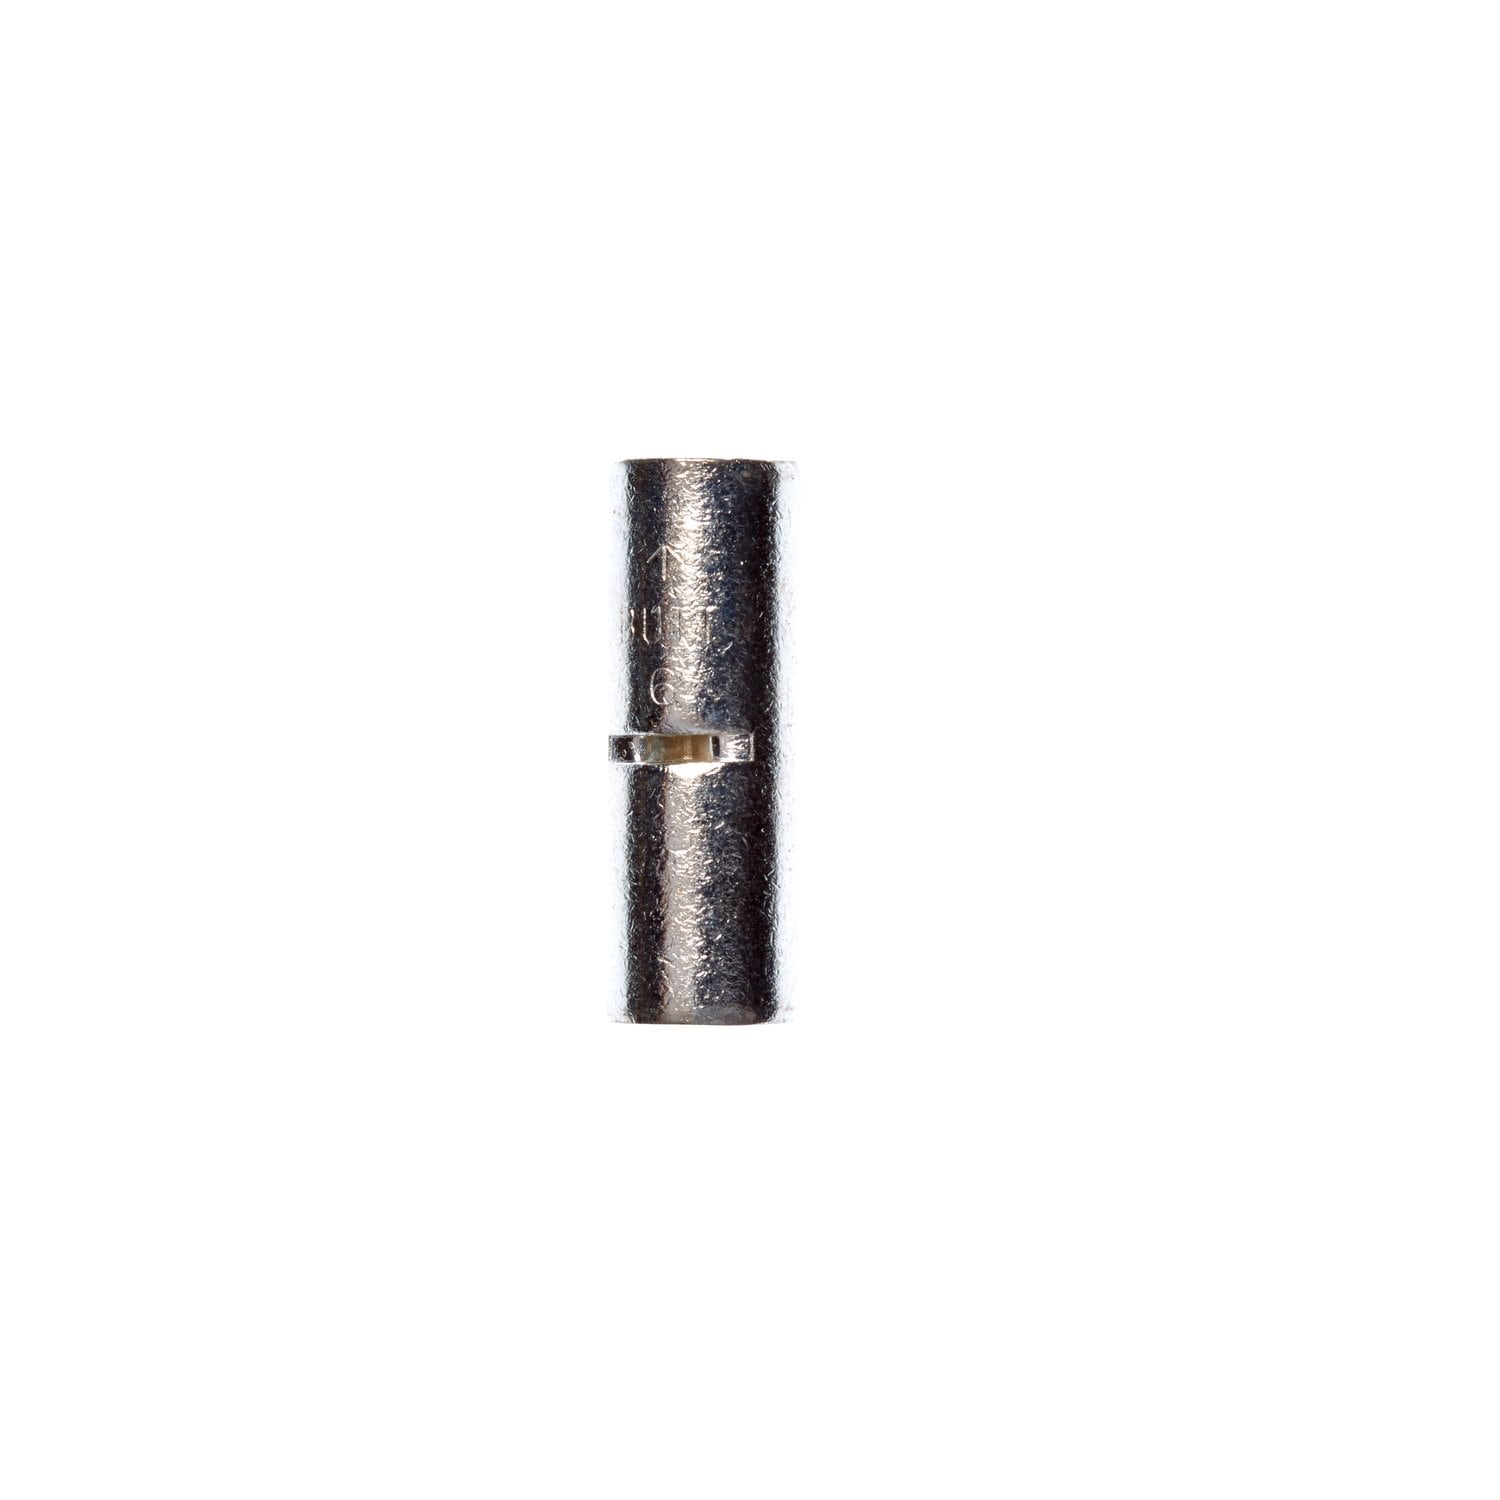 7100164159 - 3M Scotchlok Butt Connector, Non-Insulated Brazed Seam M6BCK, 6 AWG,
built-in wire stop for correct positioning, 200/Case